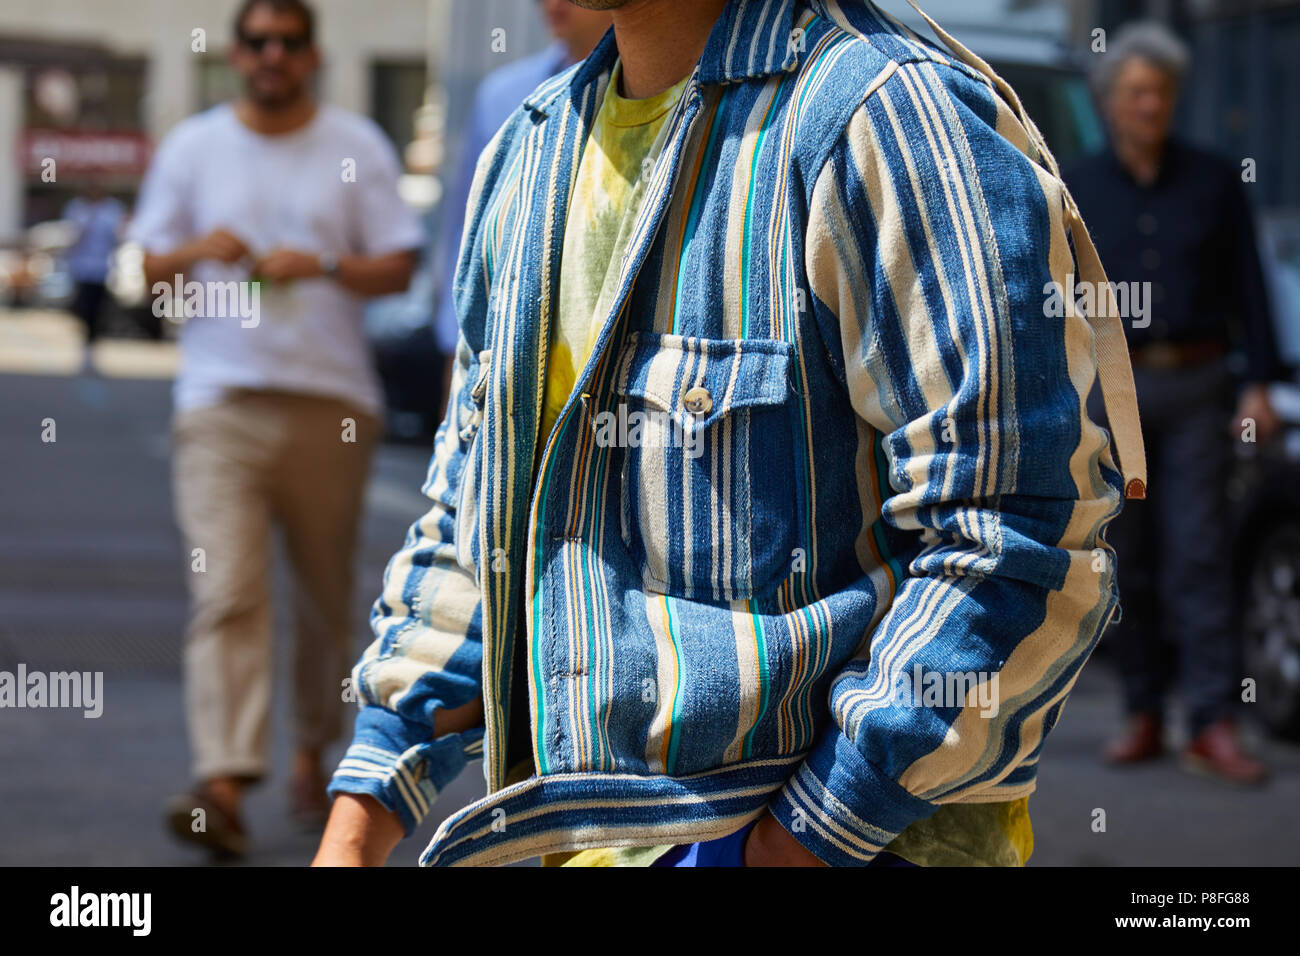 MILAN - JUNE 16: Man with blue and white striped jacket before Marni fashion show, Milan Fashion Week street style on June 16, 2018 in Milan. Stock Photo